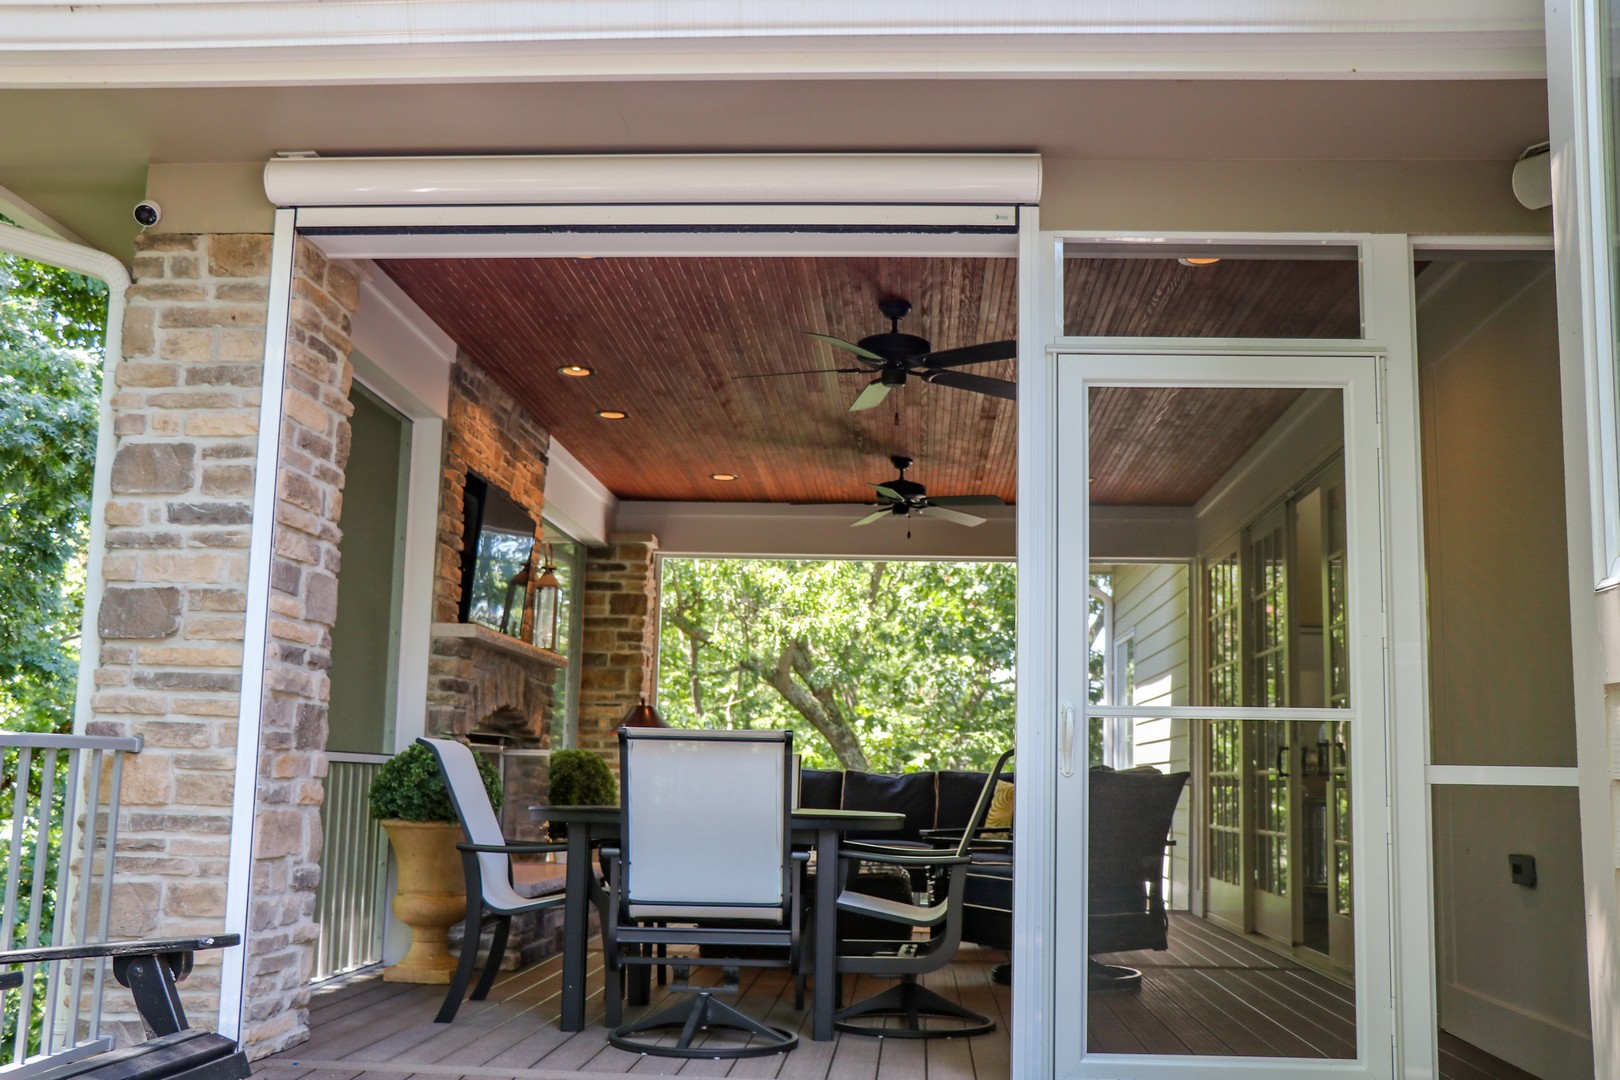 enjoy a family dinner in an outdoor room with retractable screens